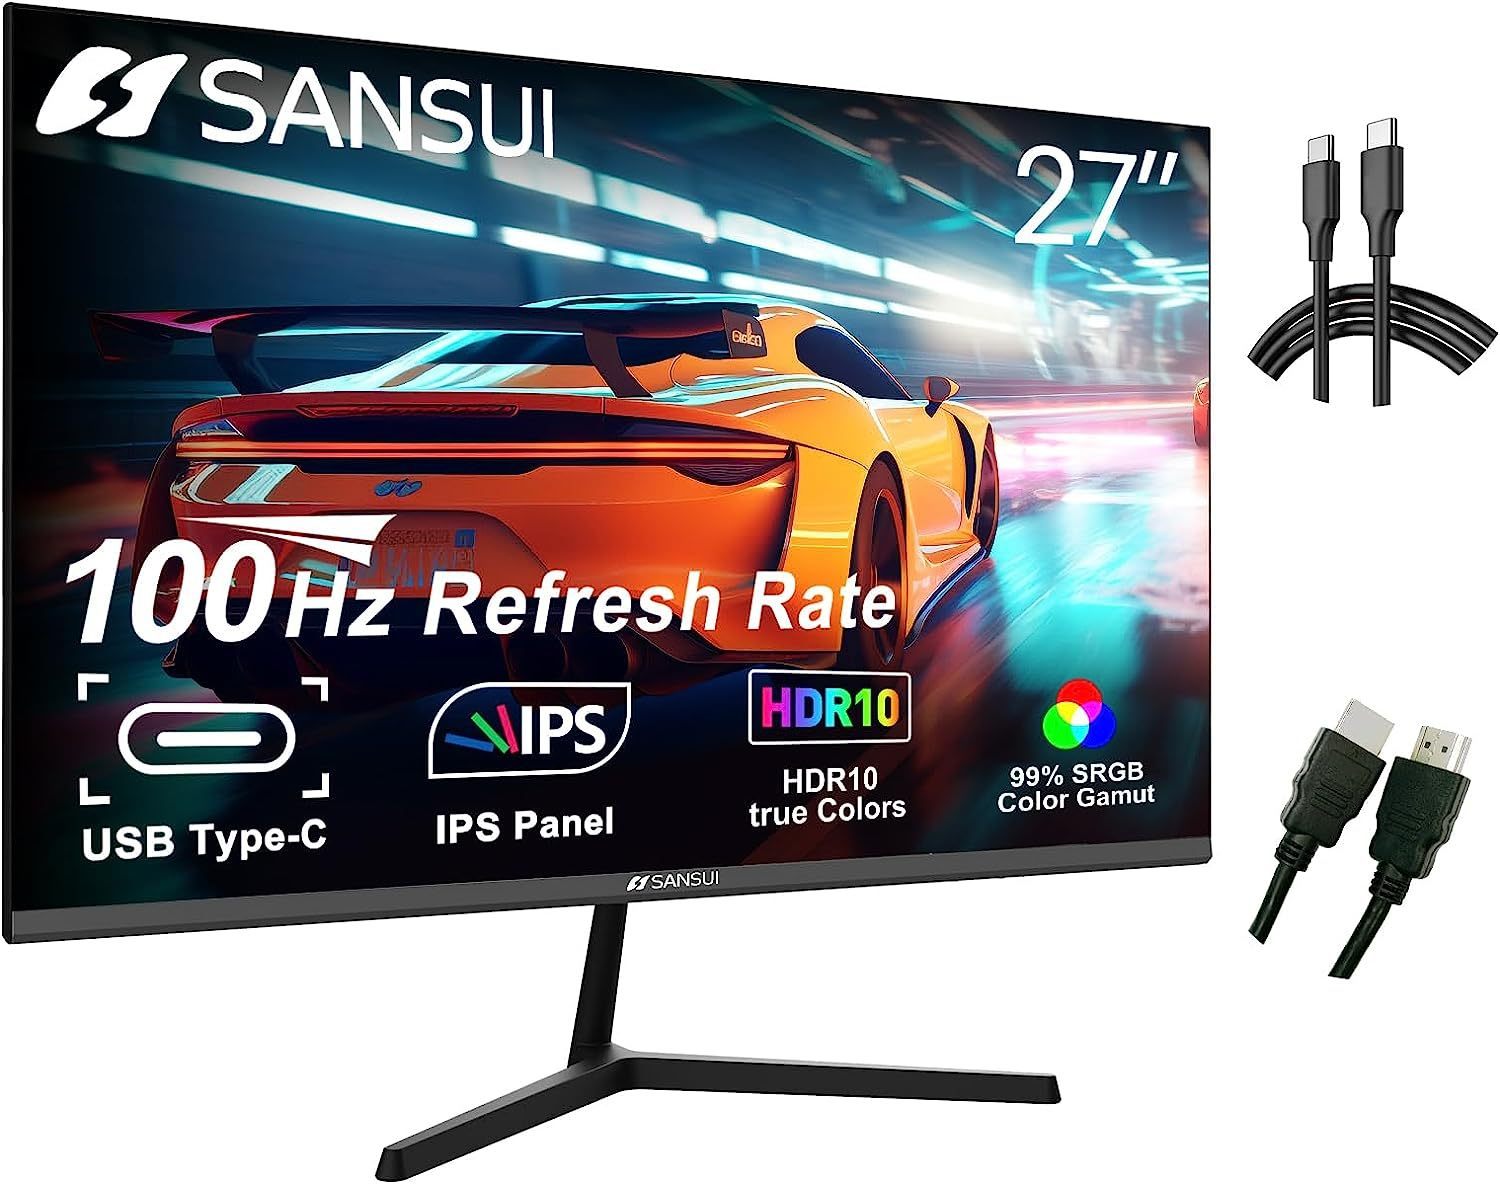 Sansui  27 inch 100Hz IPS USB Type-C FHD 1080P HDR10 Computer Monitor with Built-in Speakers HDMI DP Game RTS/FPS, tilt Adjustable for Working and Gaming (ES-27X3 Type-C Cable & HDMI Cable Included)